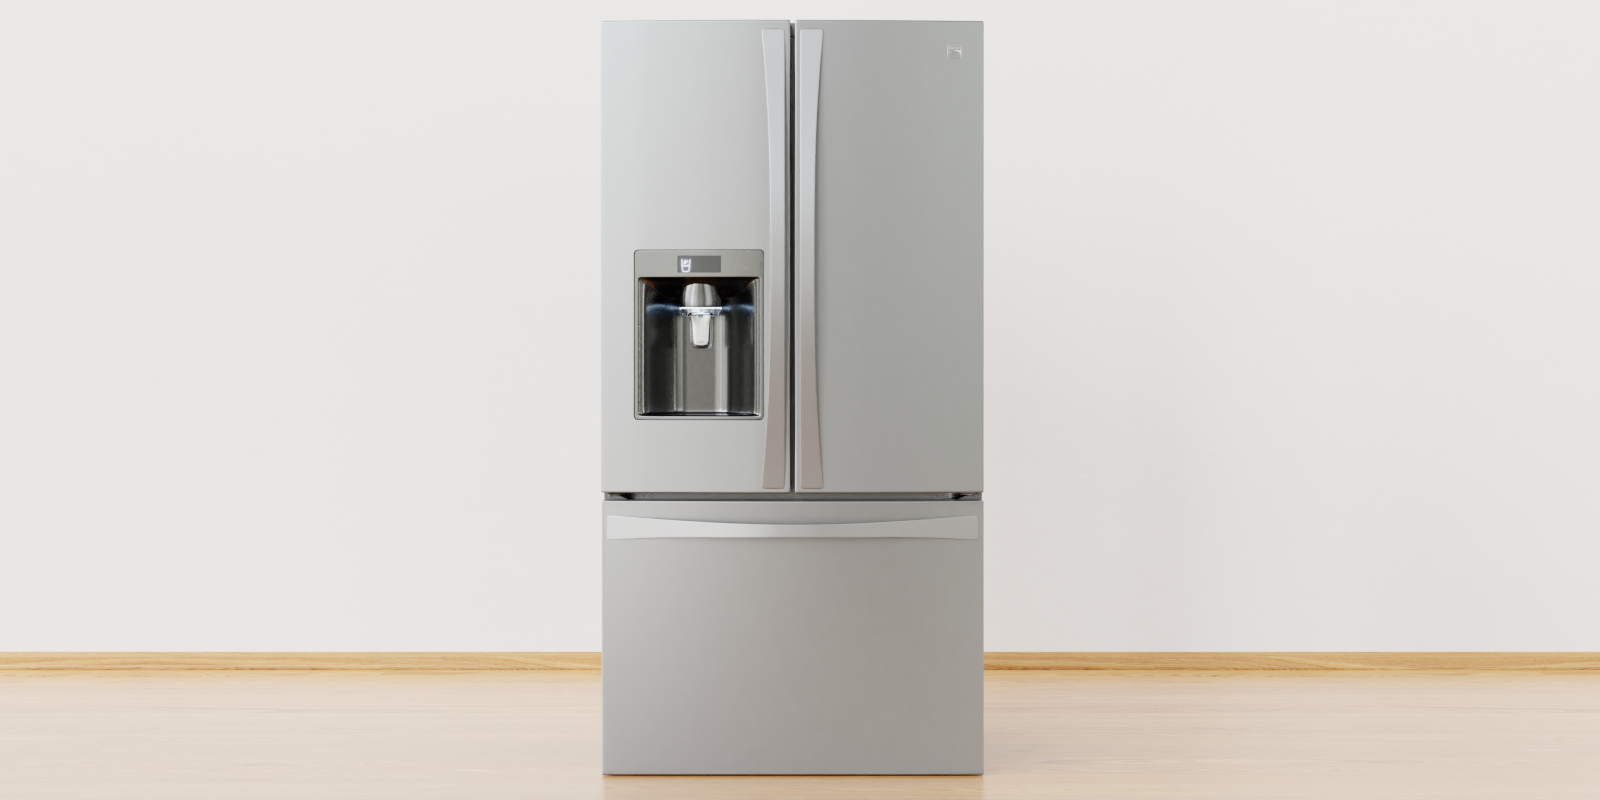 Kenmore Elite Refrigerator: A Marriage of Luxury and Functionality